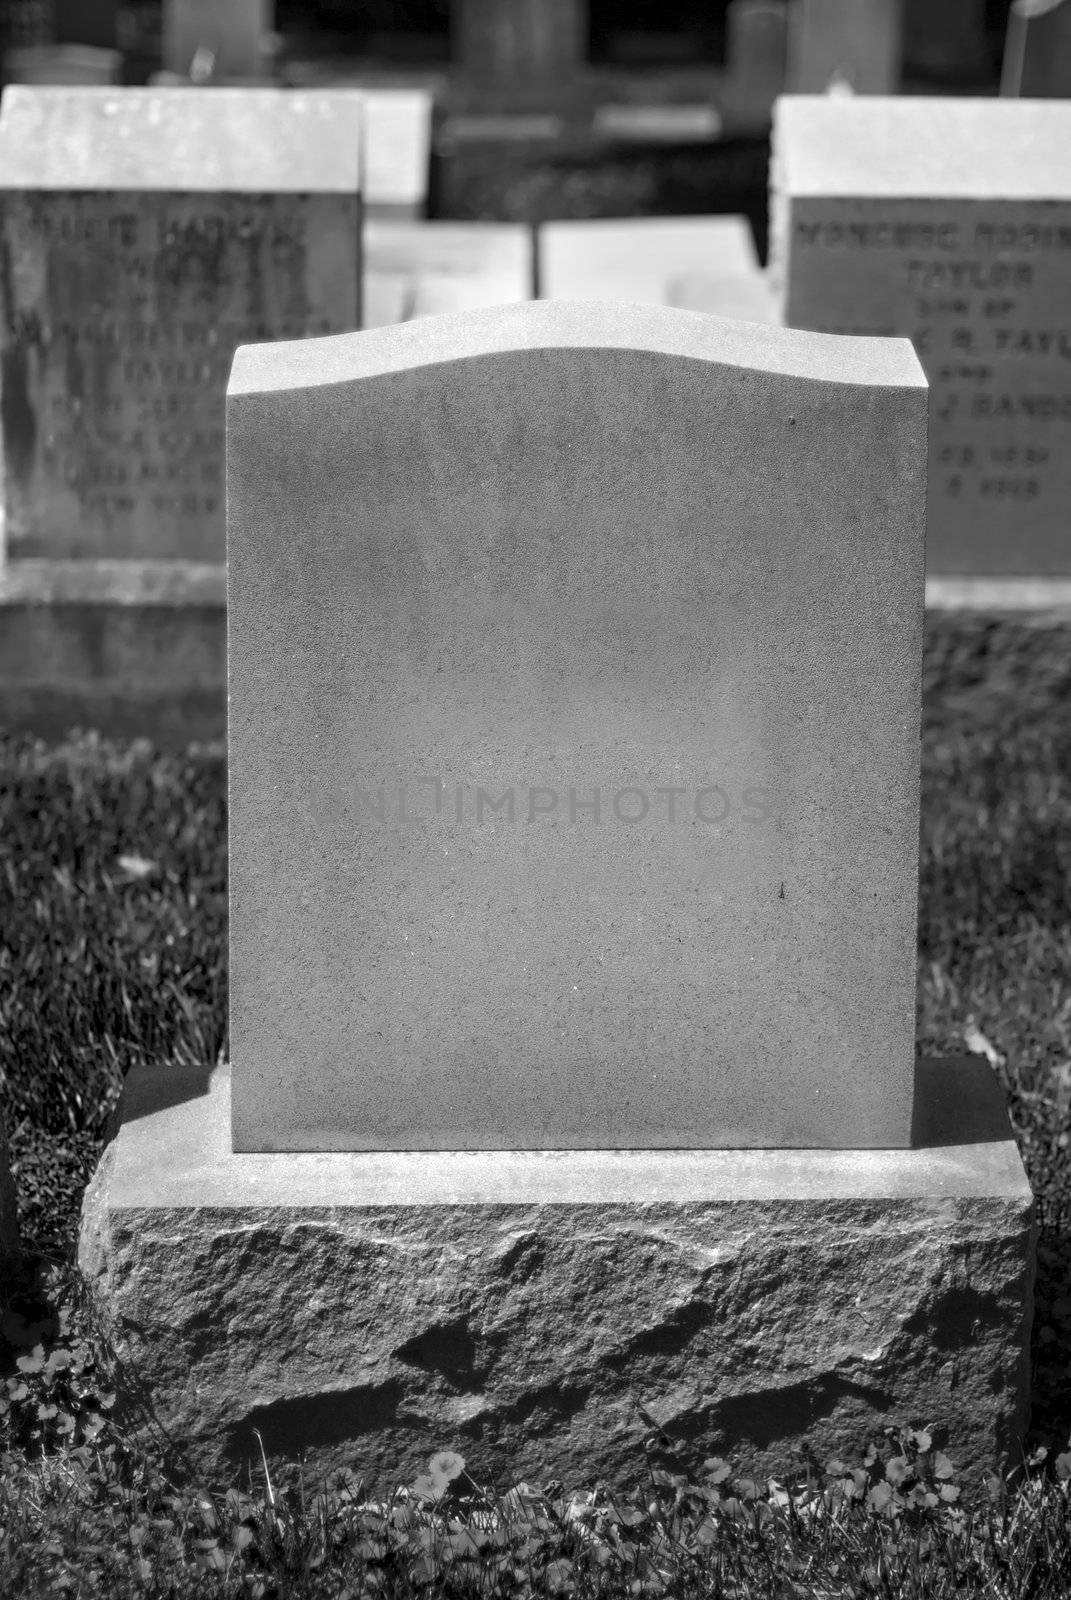 Blank Tombstone (B+W) by npologuy